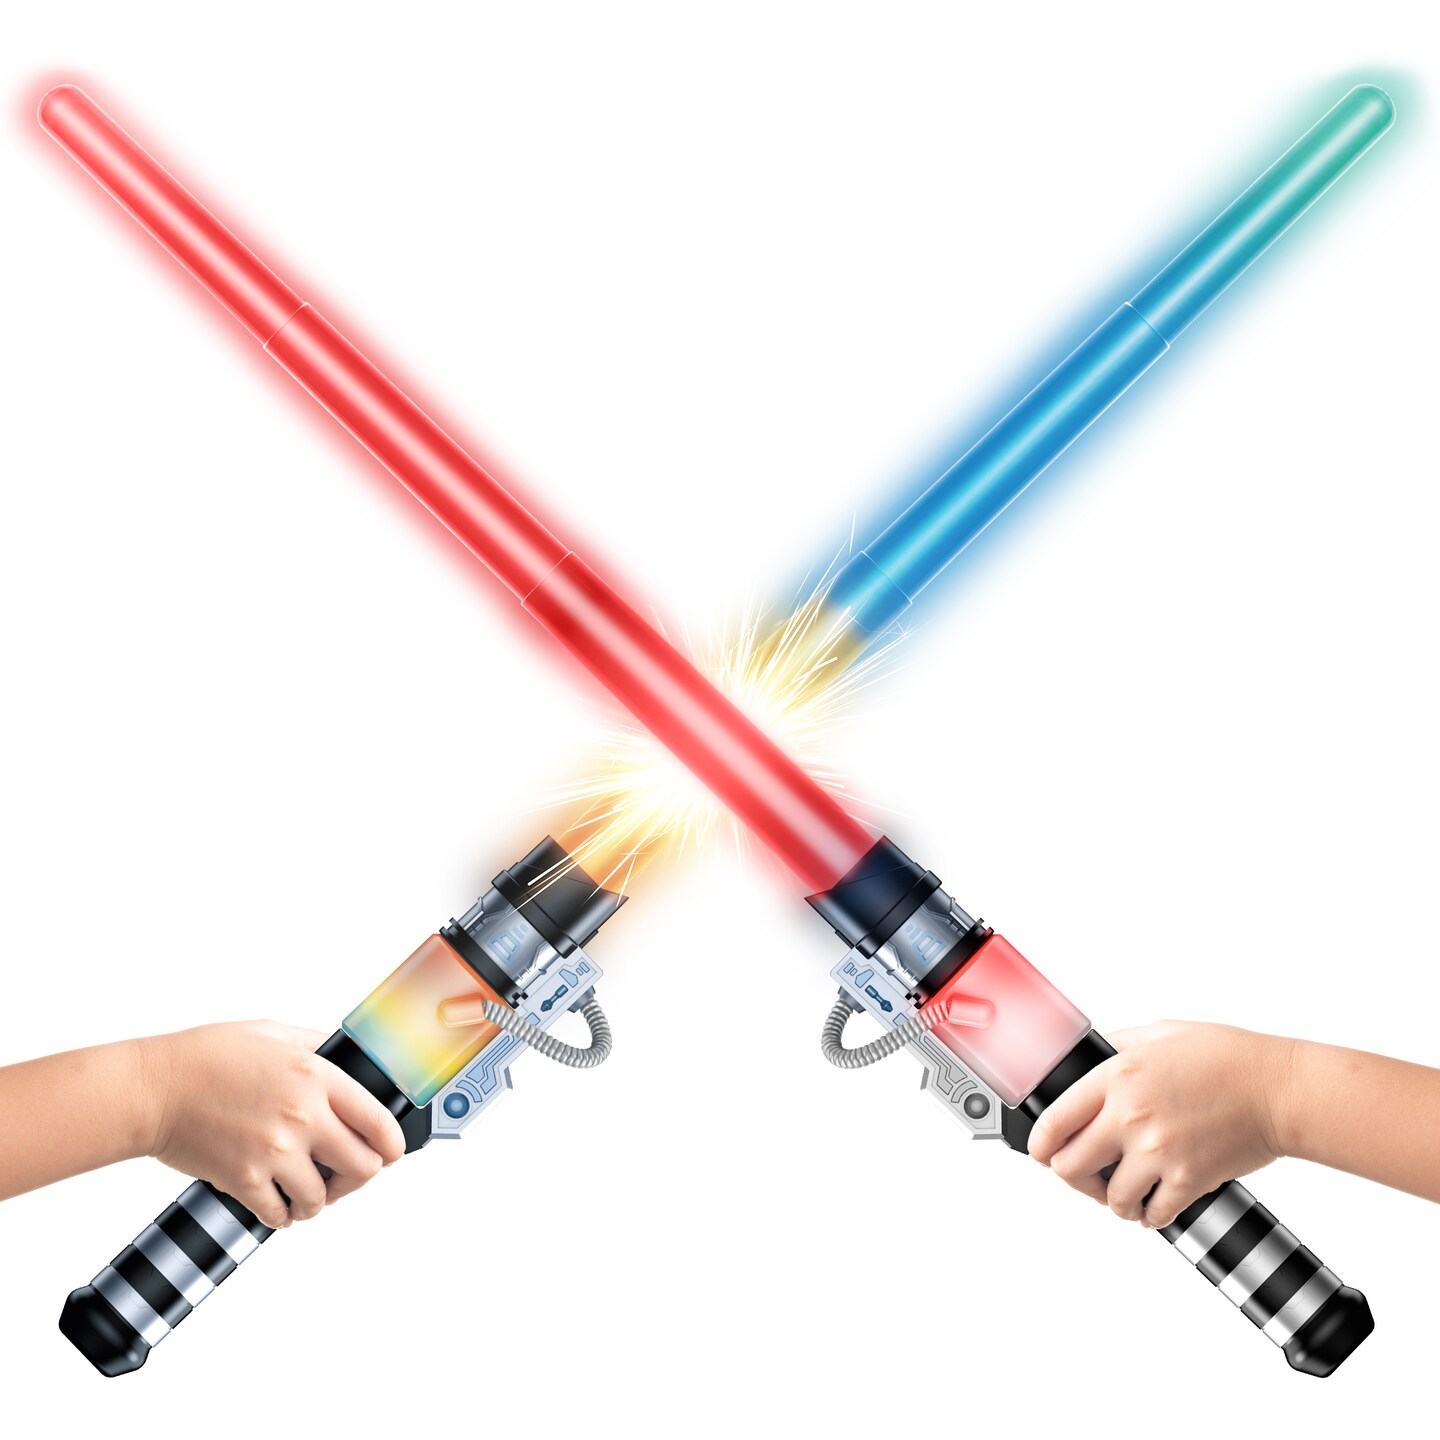 USA Toyz Light Force Galaxy Light Saber for Kids or Adults